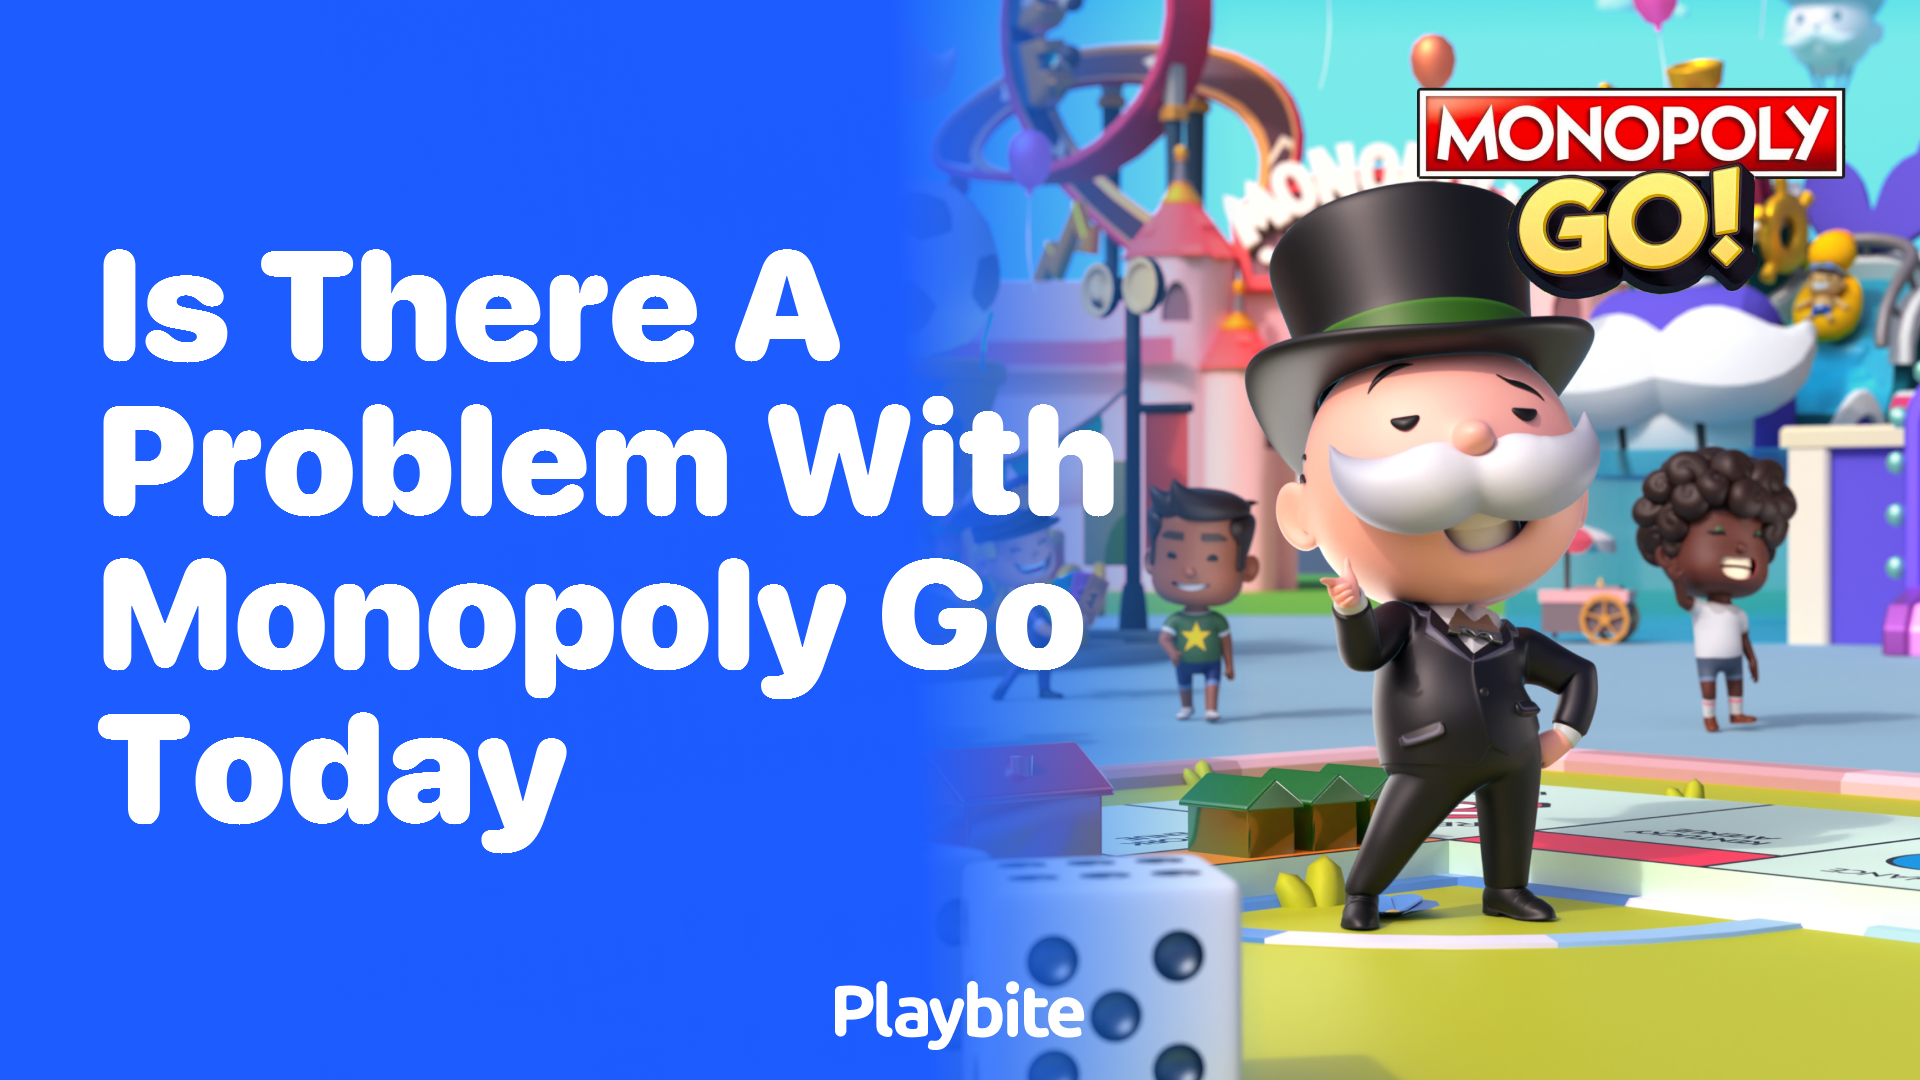 Is There a Problem With Monopoly Go Today?